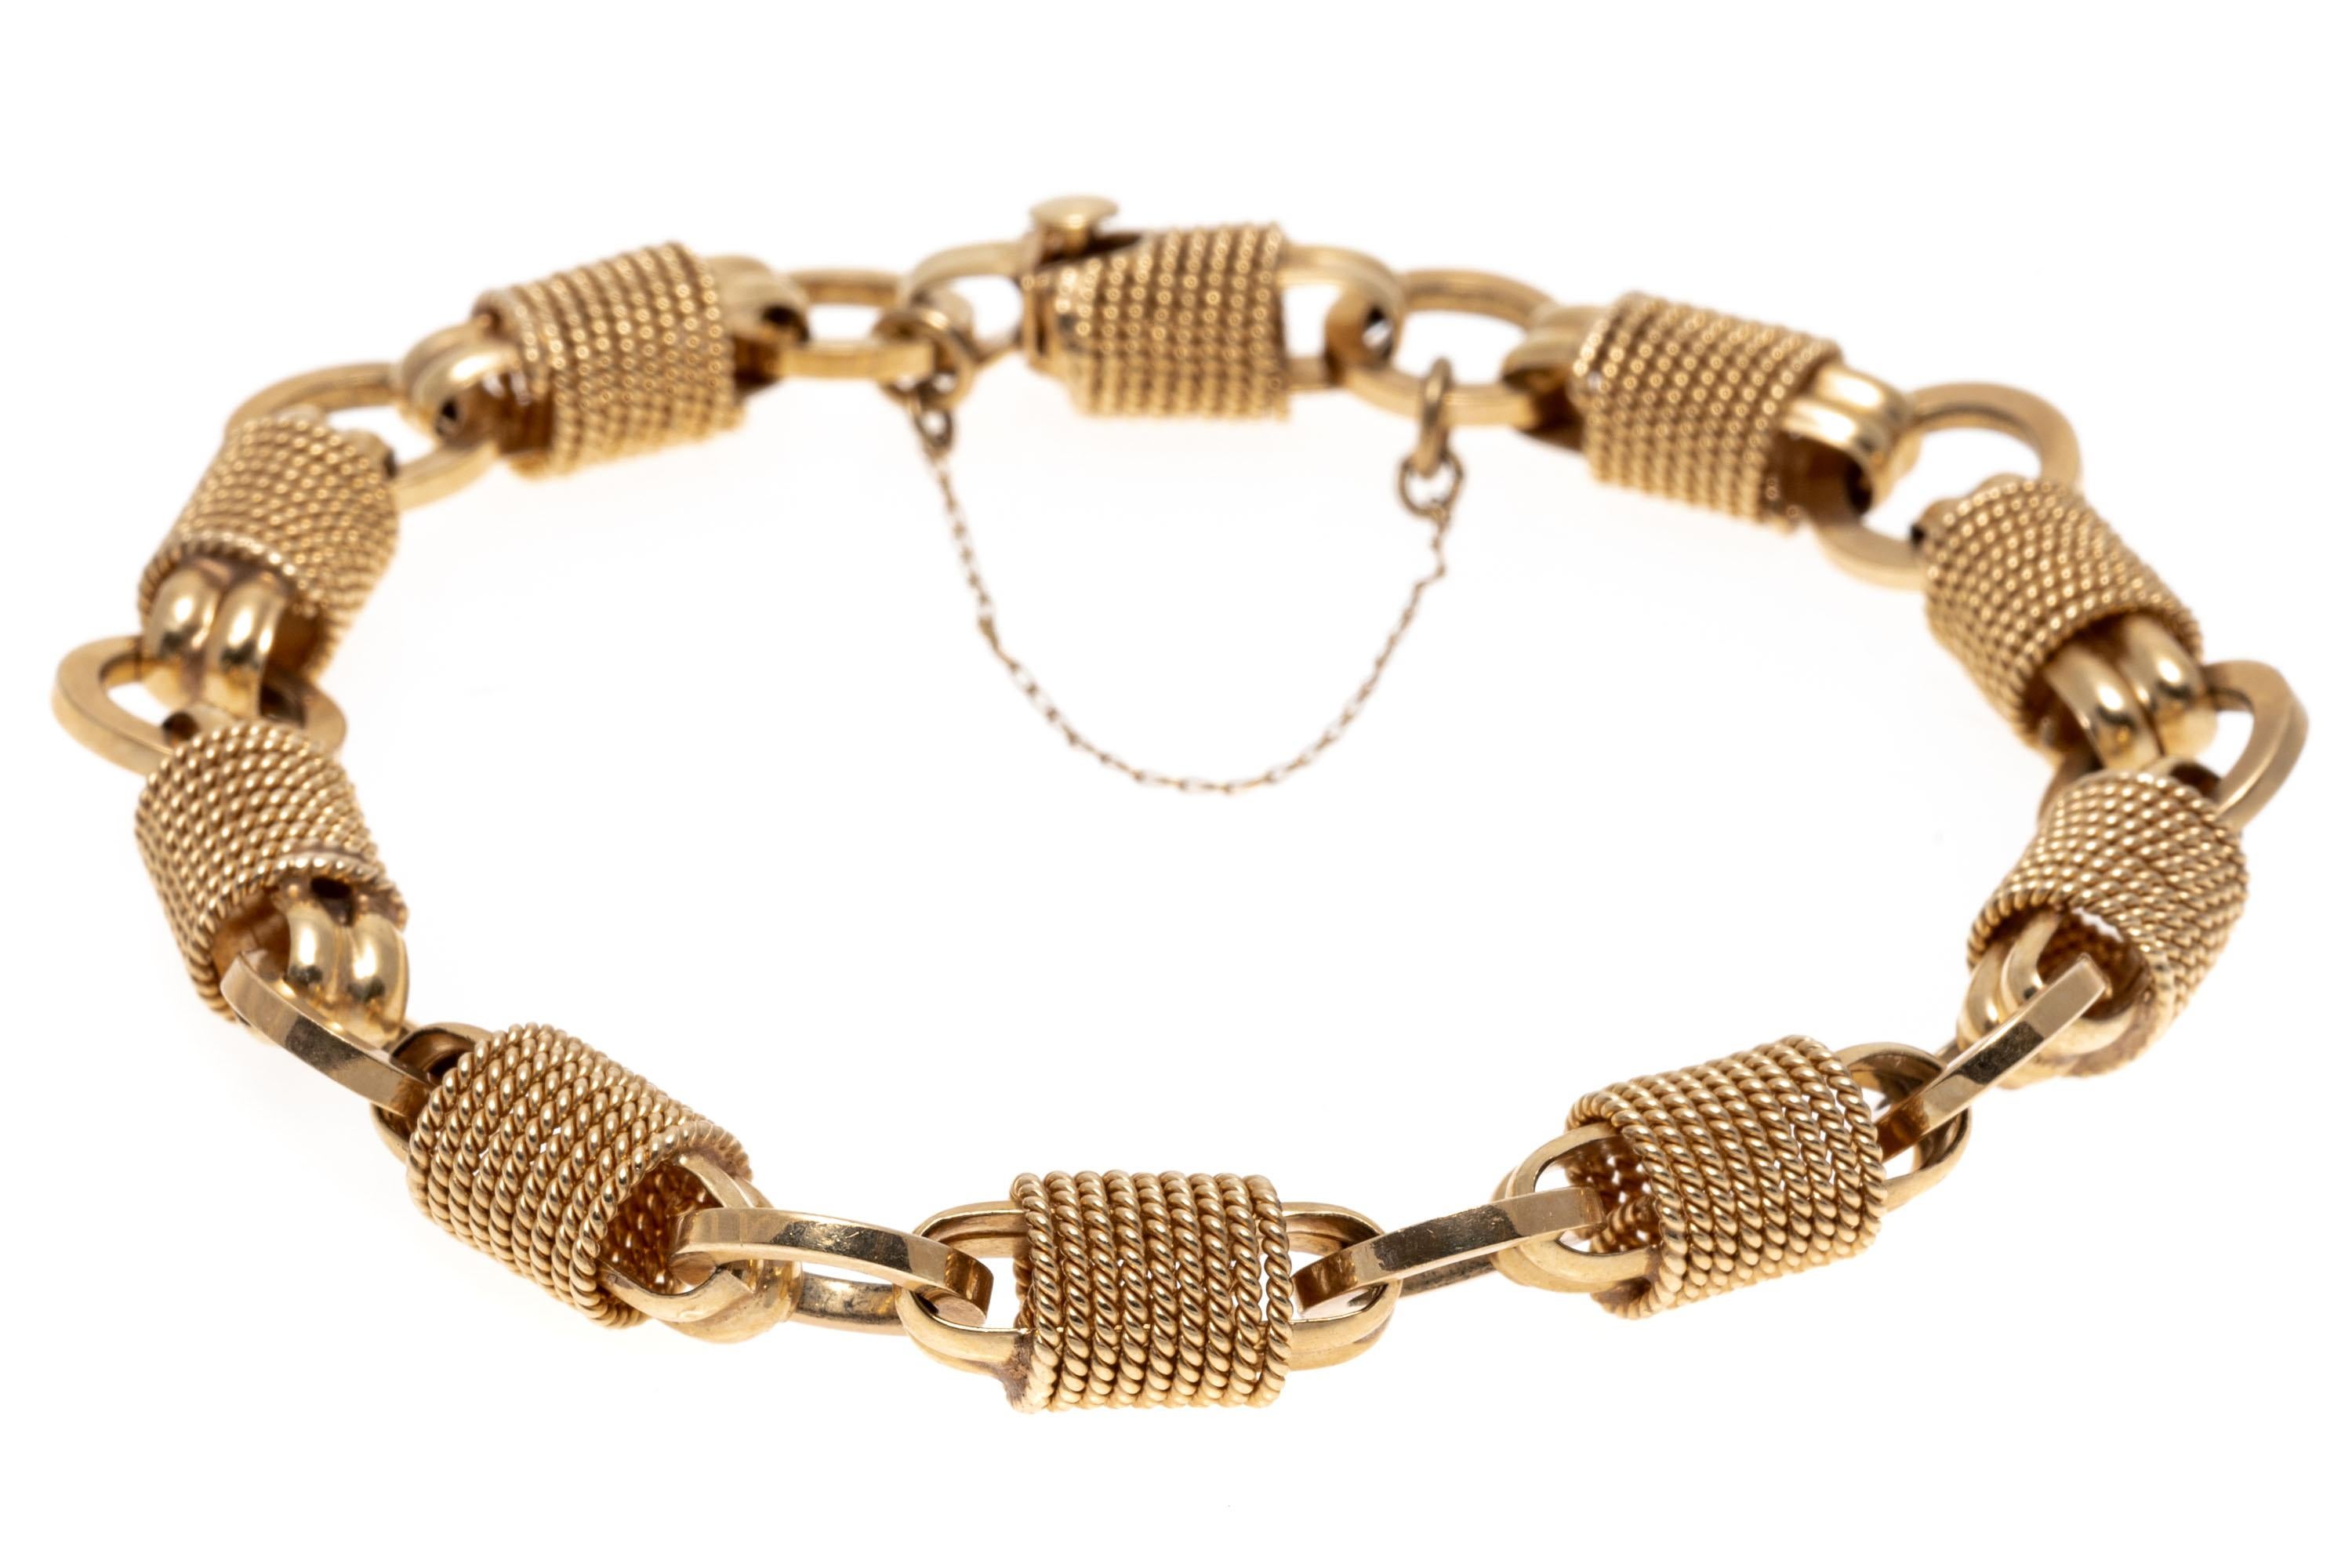 This unique 14K yellow gold bracelet presents alternating round and barrel styles links. The barrel links are wrapped in a twisted rope display, adding a rustic appeal. Box style clasp with safety latch and chain for added security.
Marks: 14K